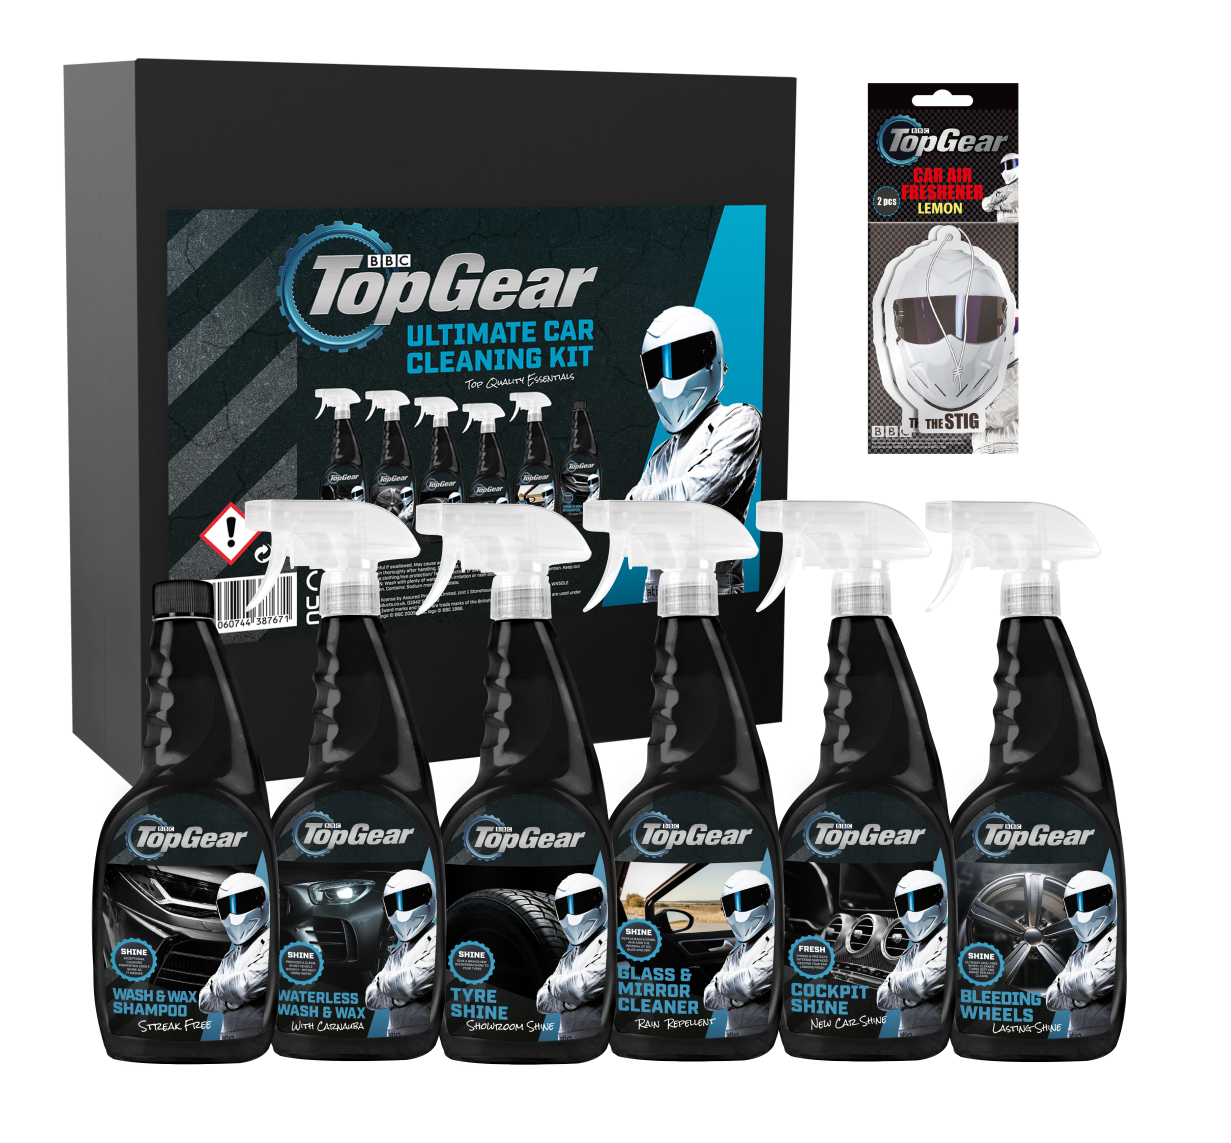 Top Gear 7 Piece Car Cleaning Kit 2 Pack of Air Fresheners